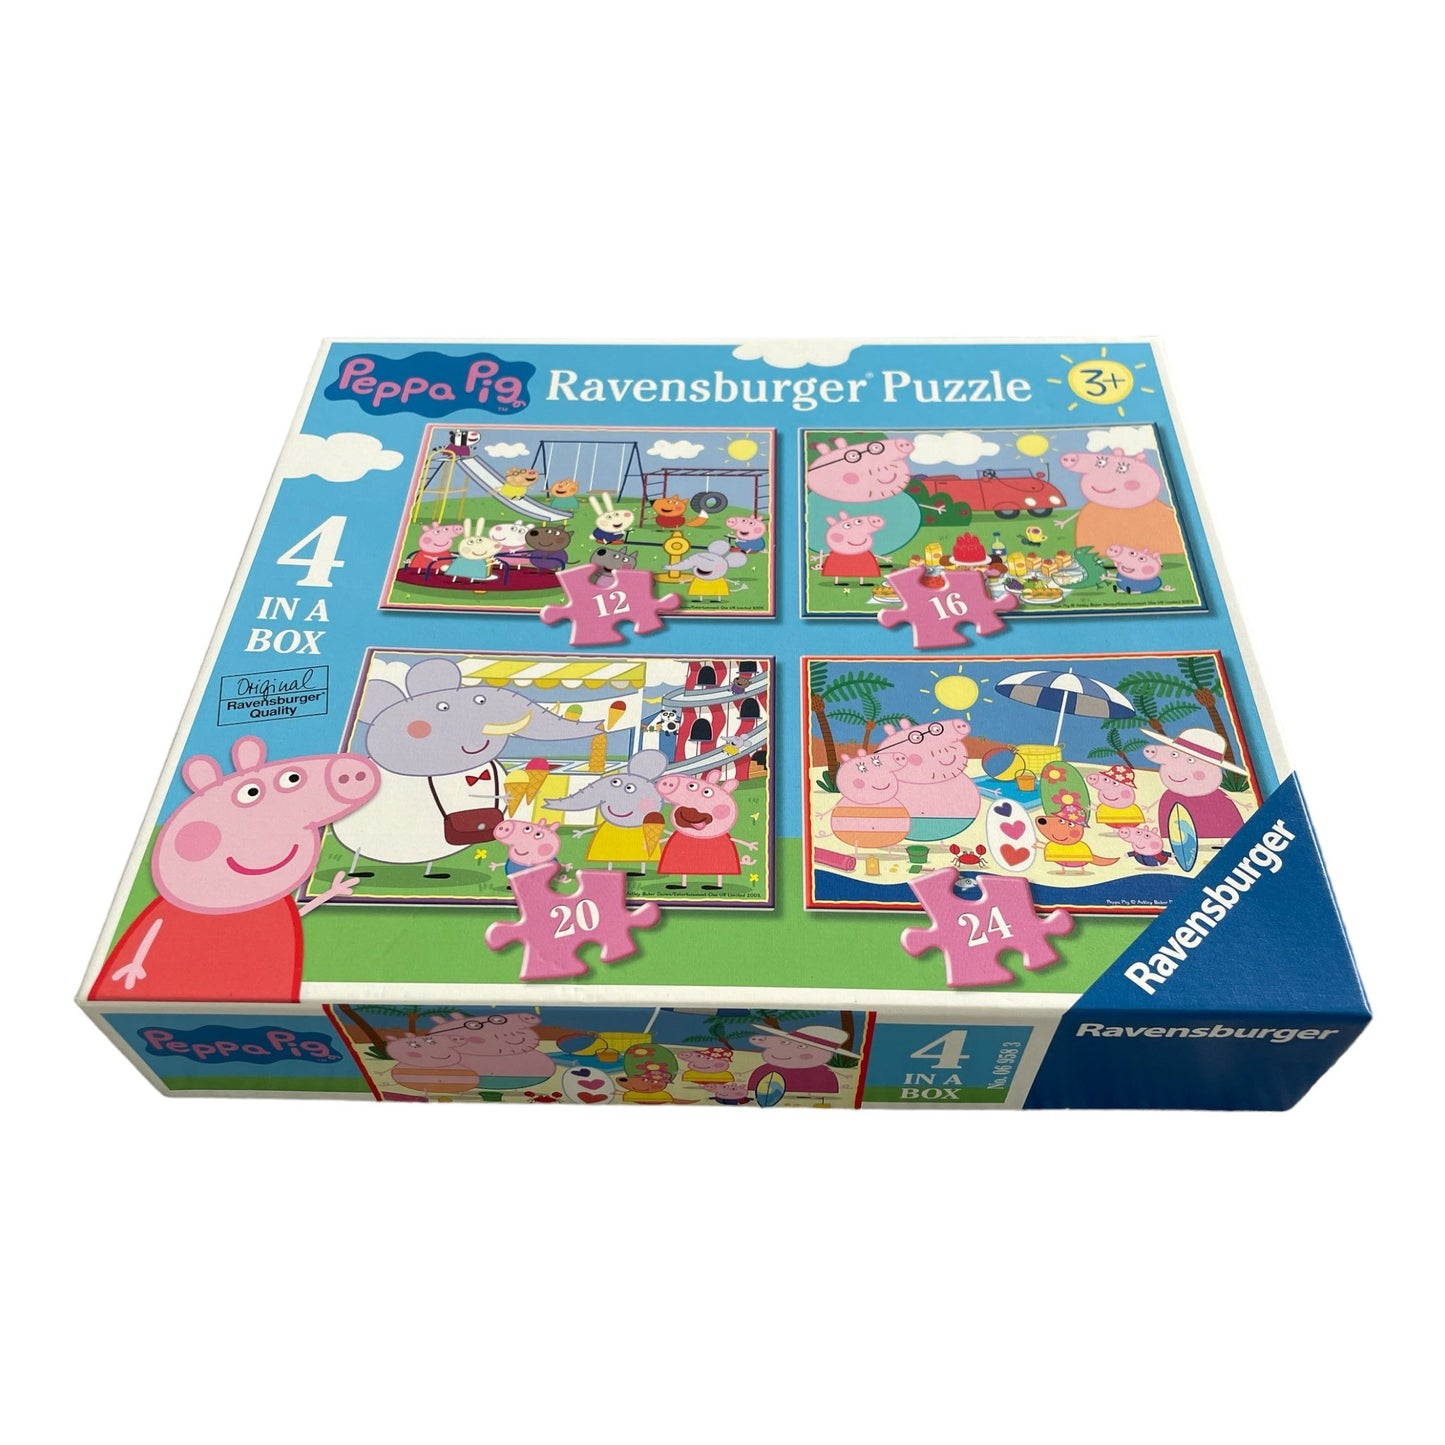 Peppa Pig 4 in a box puzzles (12,16,20,24 pices) - Ravensburger